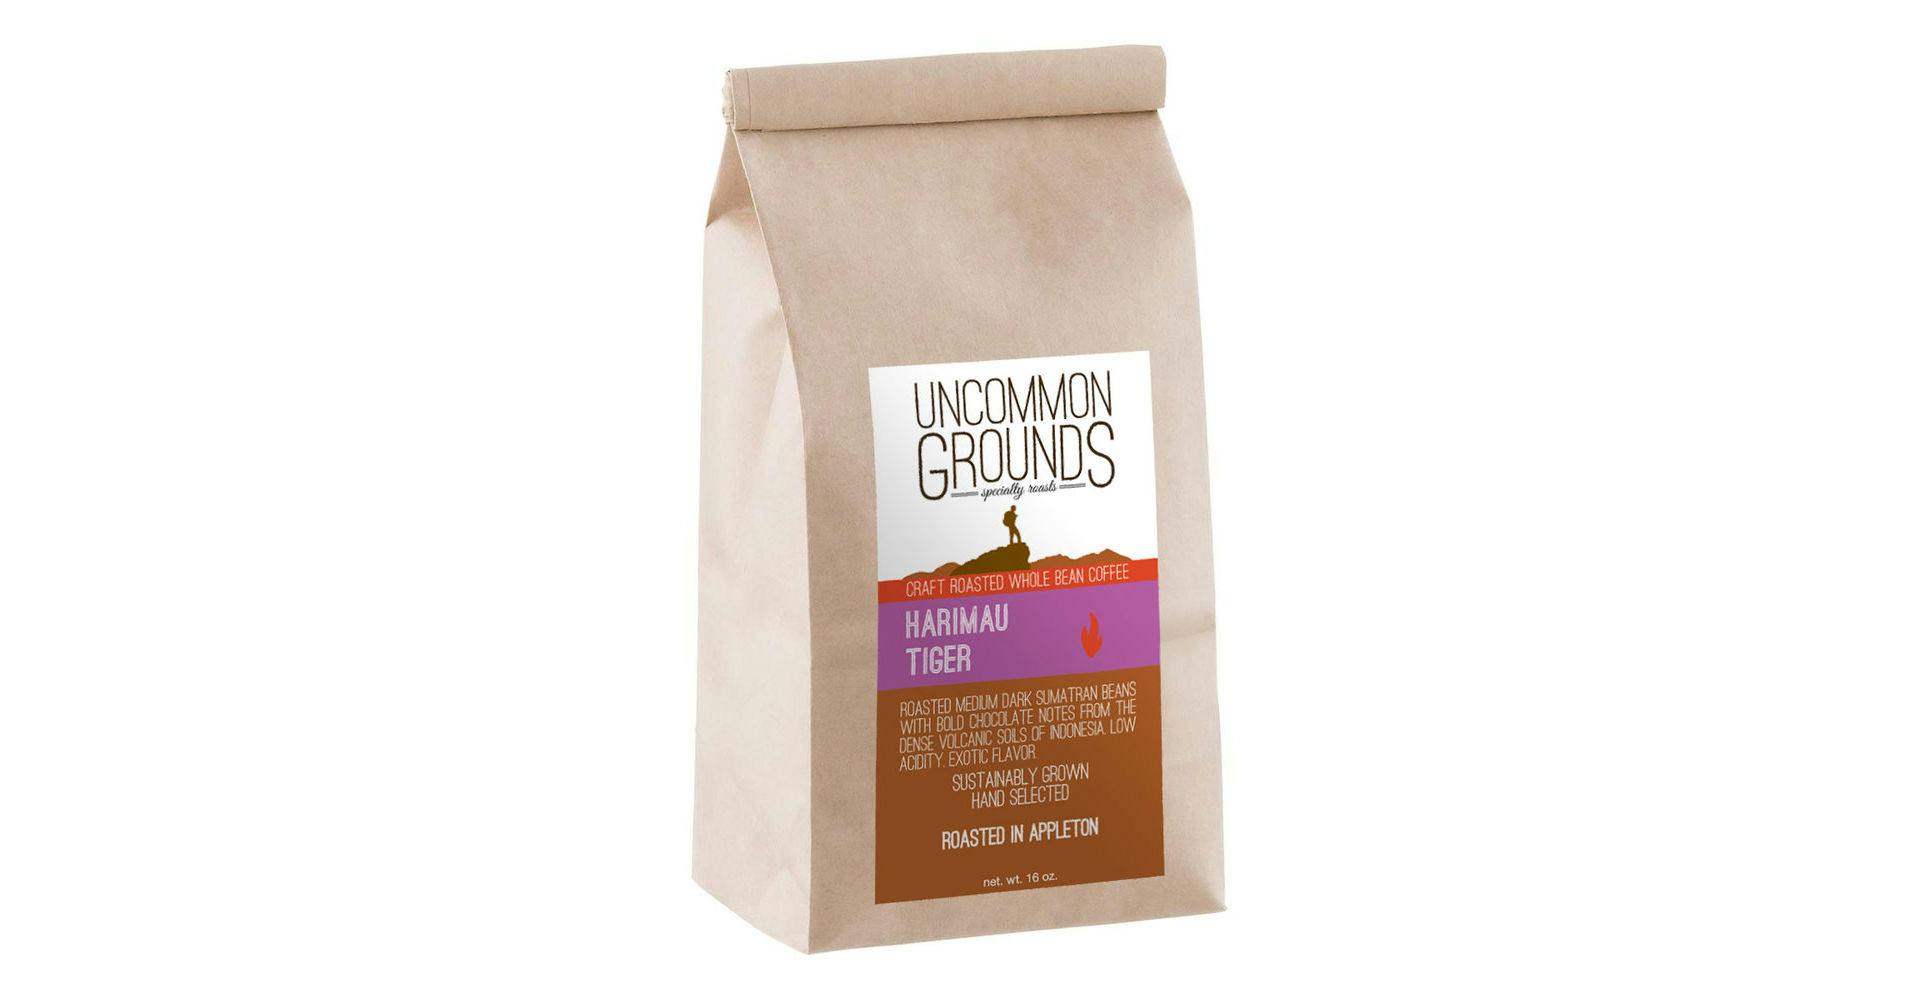 Uncommon Grounds Harimau Tiger (1# Bag) from Breadsmith - Van Roy Rd. in Appleton, WI